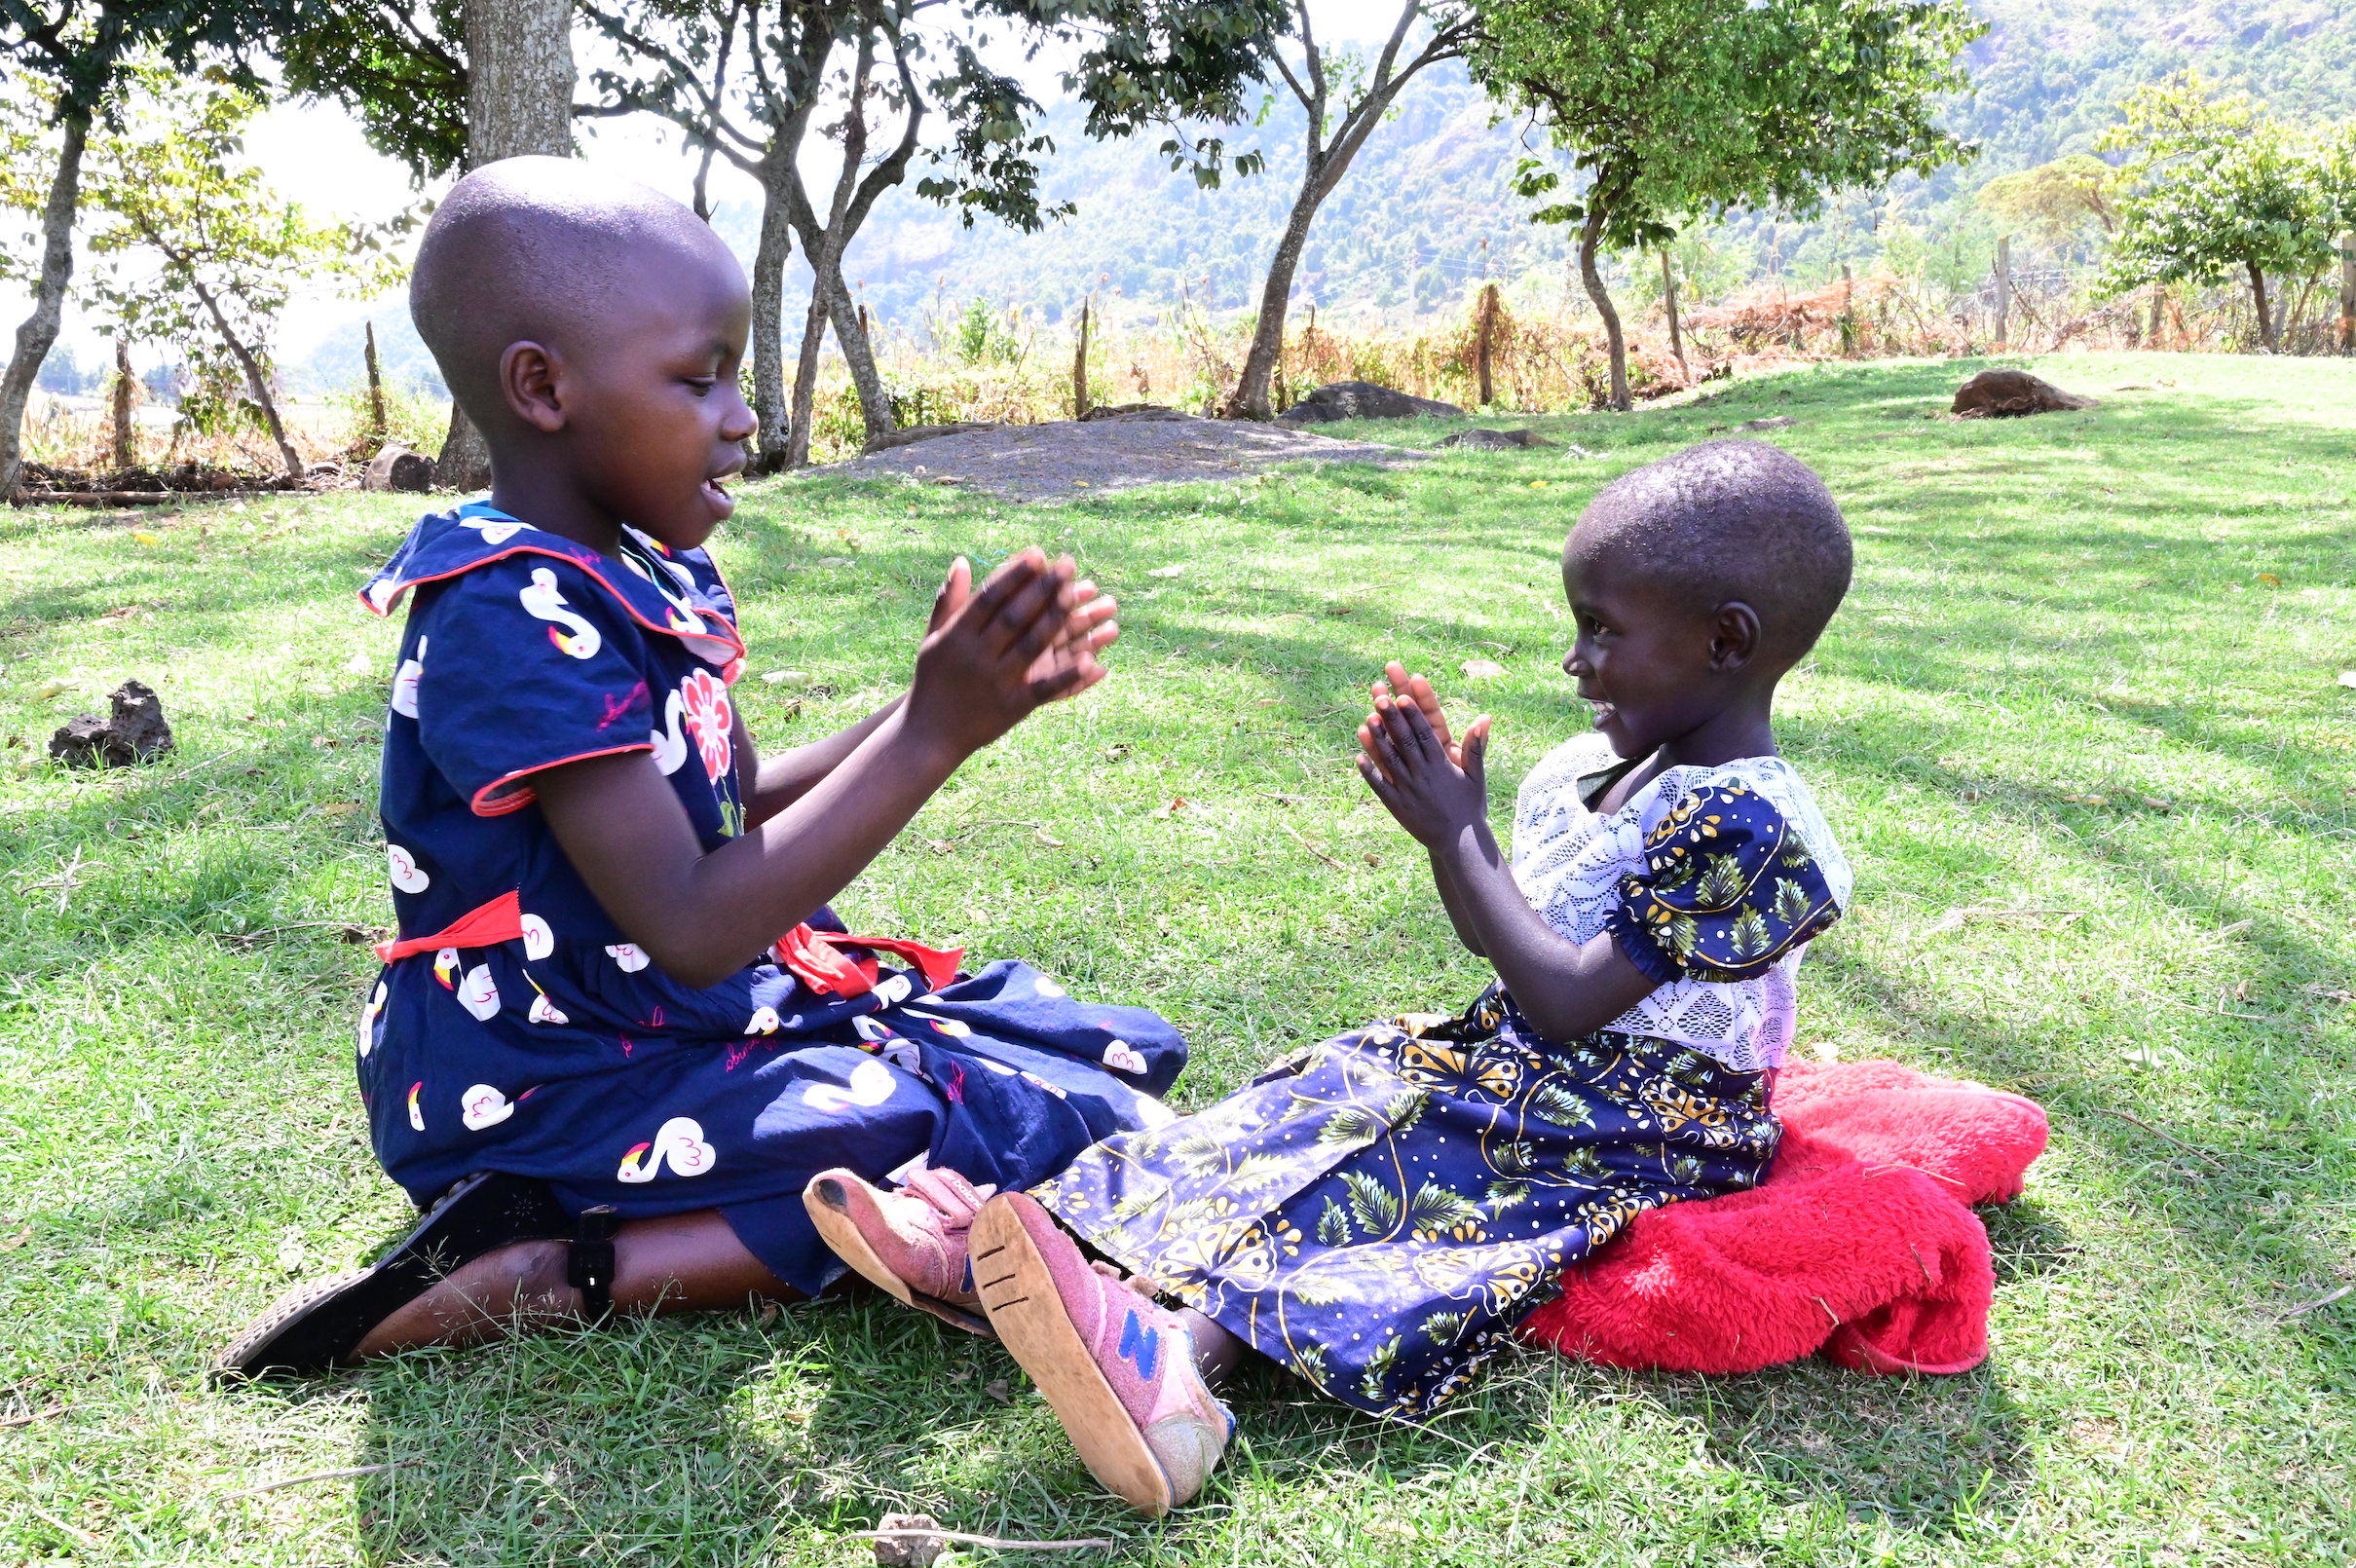 Lazarus’ daughter, Anneth aged 9 (left) and his granddaughter Velmur aged 4 (right) are shielded from the scorching sun as they play under the tree shade. ©World Vision photo/Hellen Owuor.